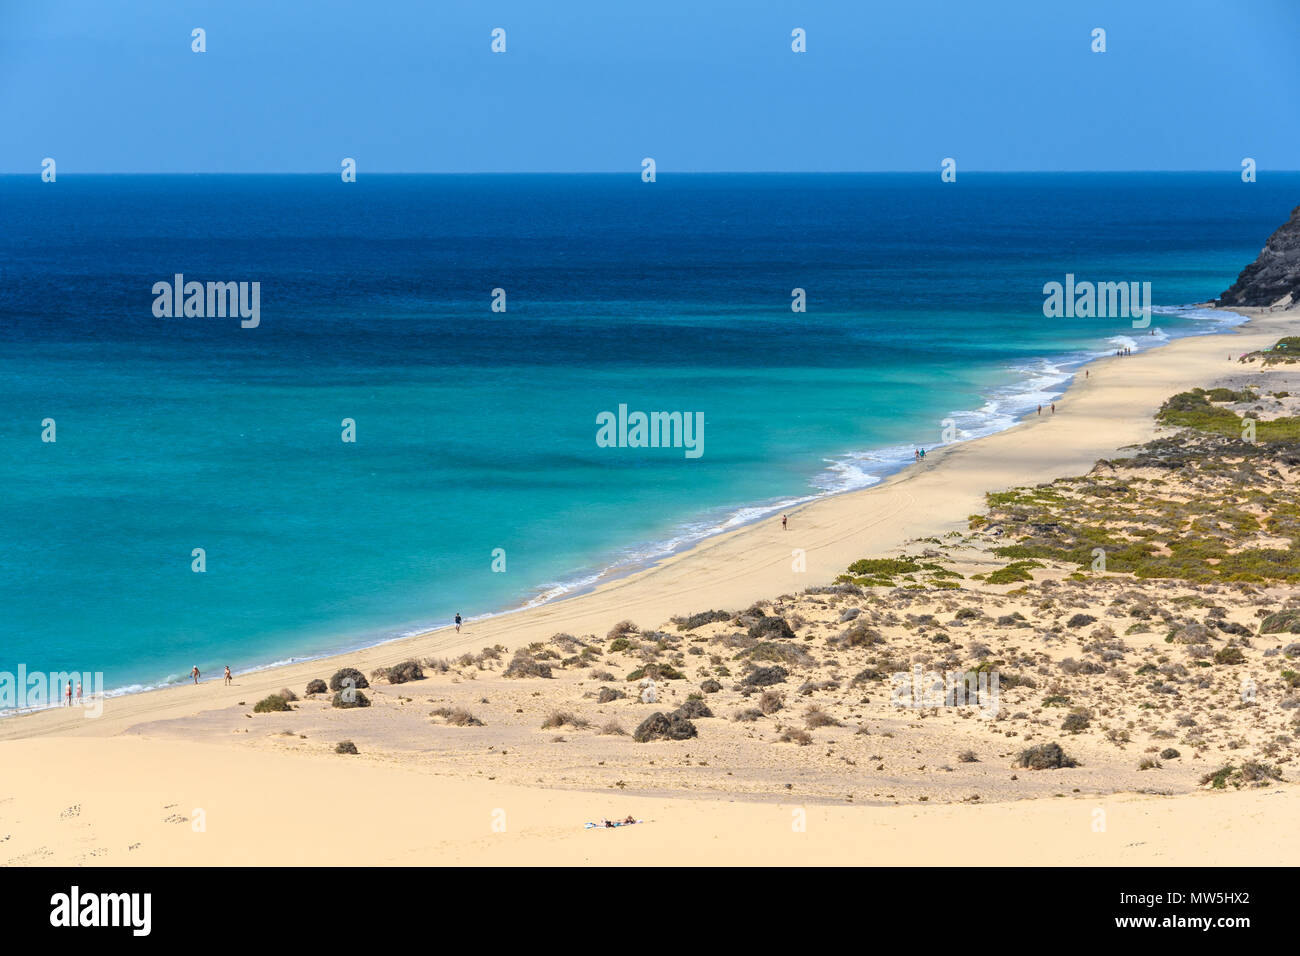 Aerial View Of Sotavento Beach In Fuerteventura Canary Islands Spain Stock Photo Alamy